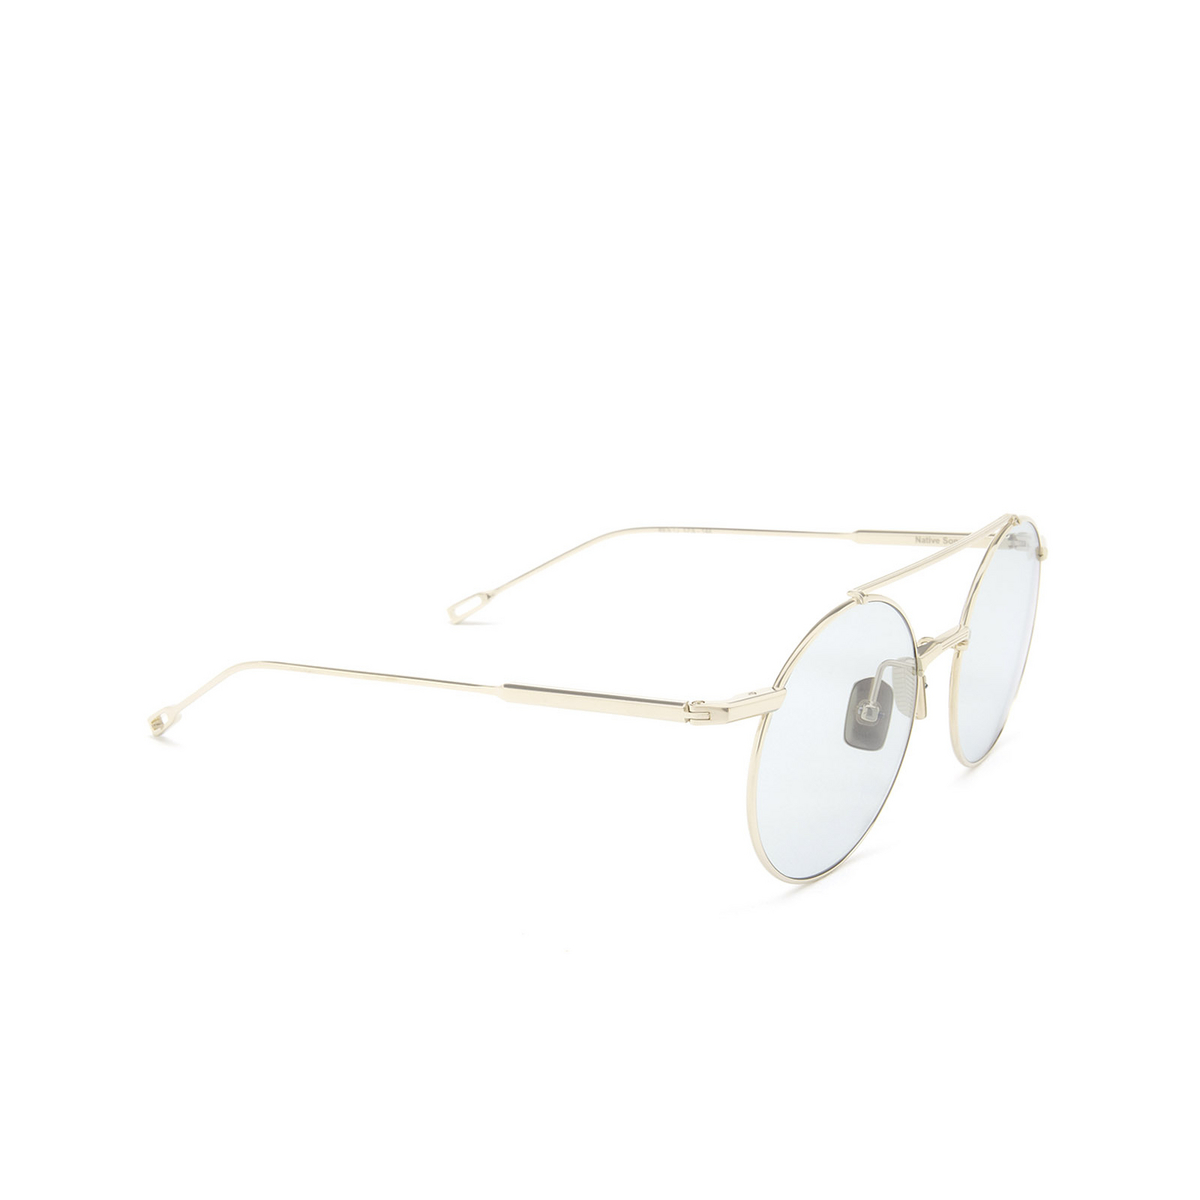 Native Sons® Round Sunglasses: Aston Exp color 16K GOLD - three-quarters view.